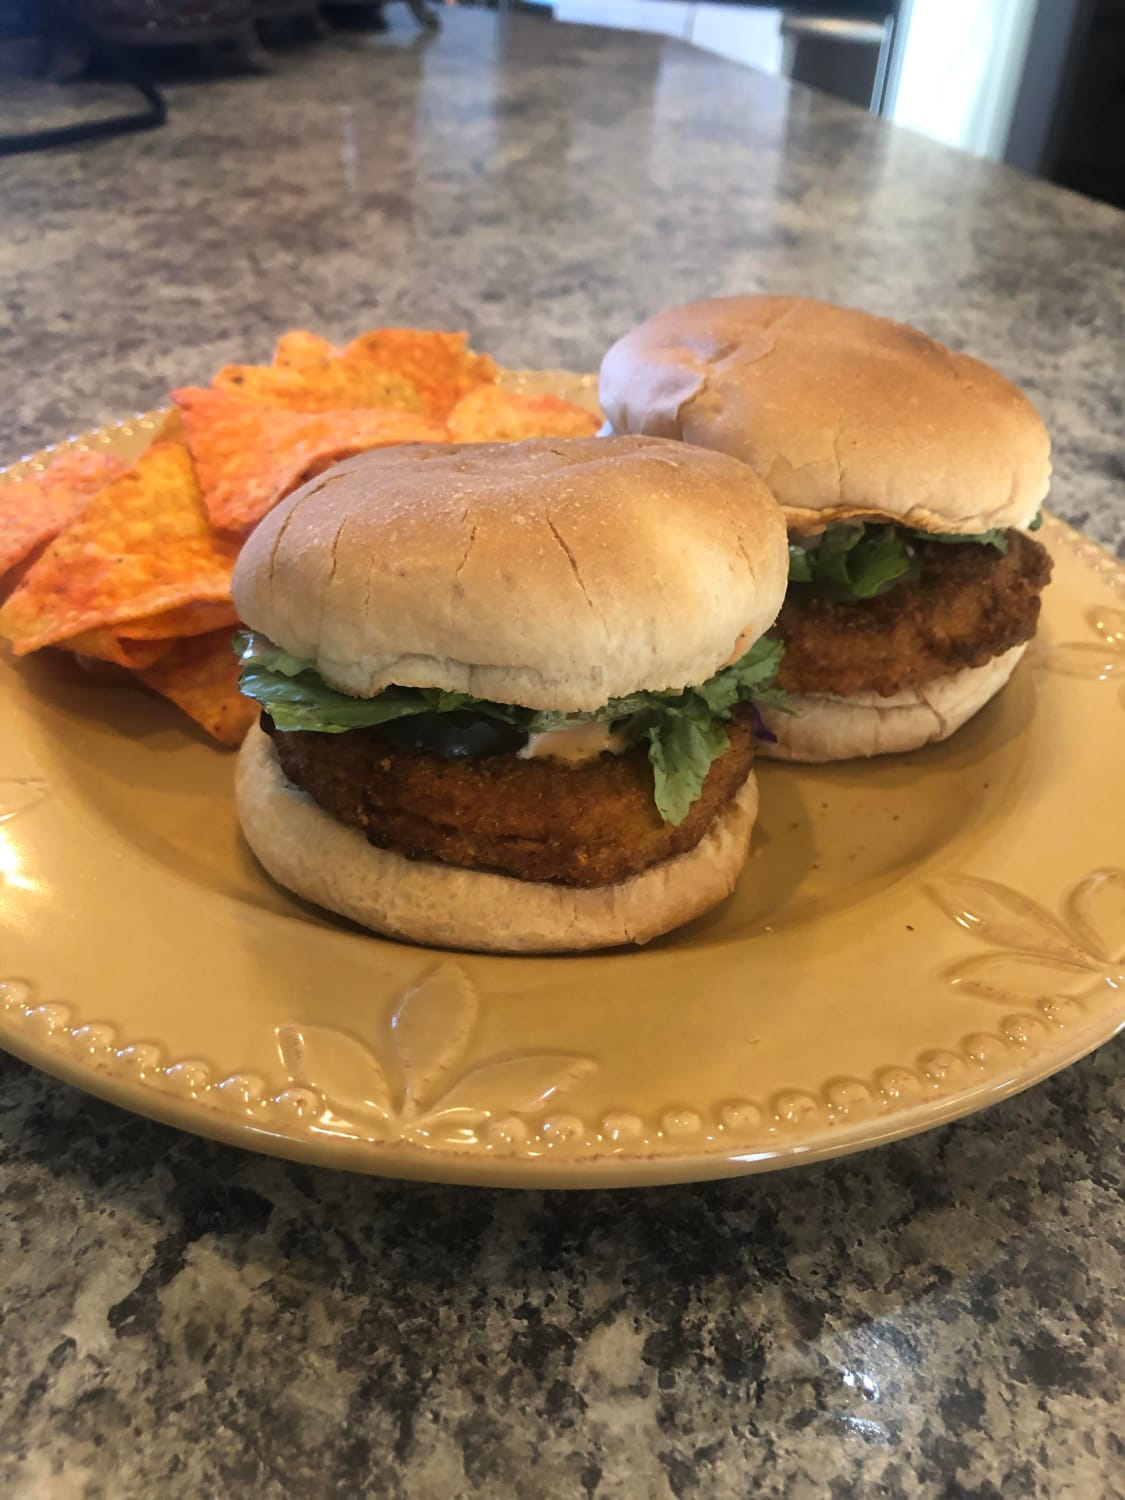 Air-fryer chicken patties, sriracha mayo, pickles, and chopped romaine on toasted Rotella buns.